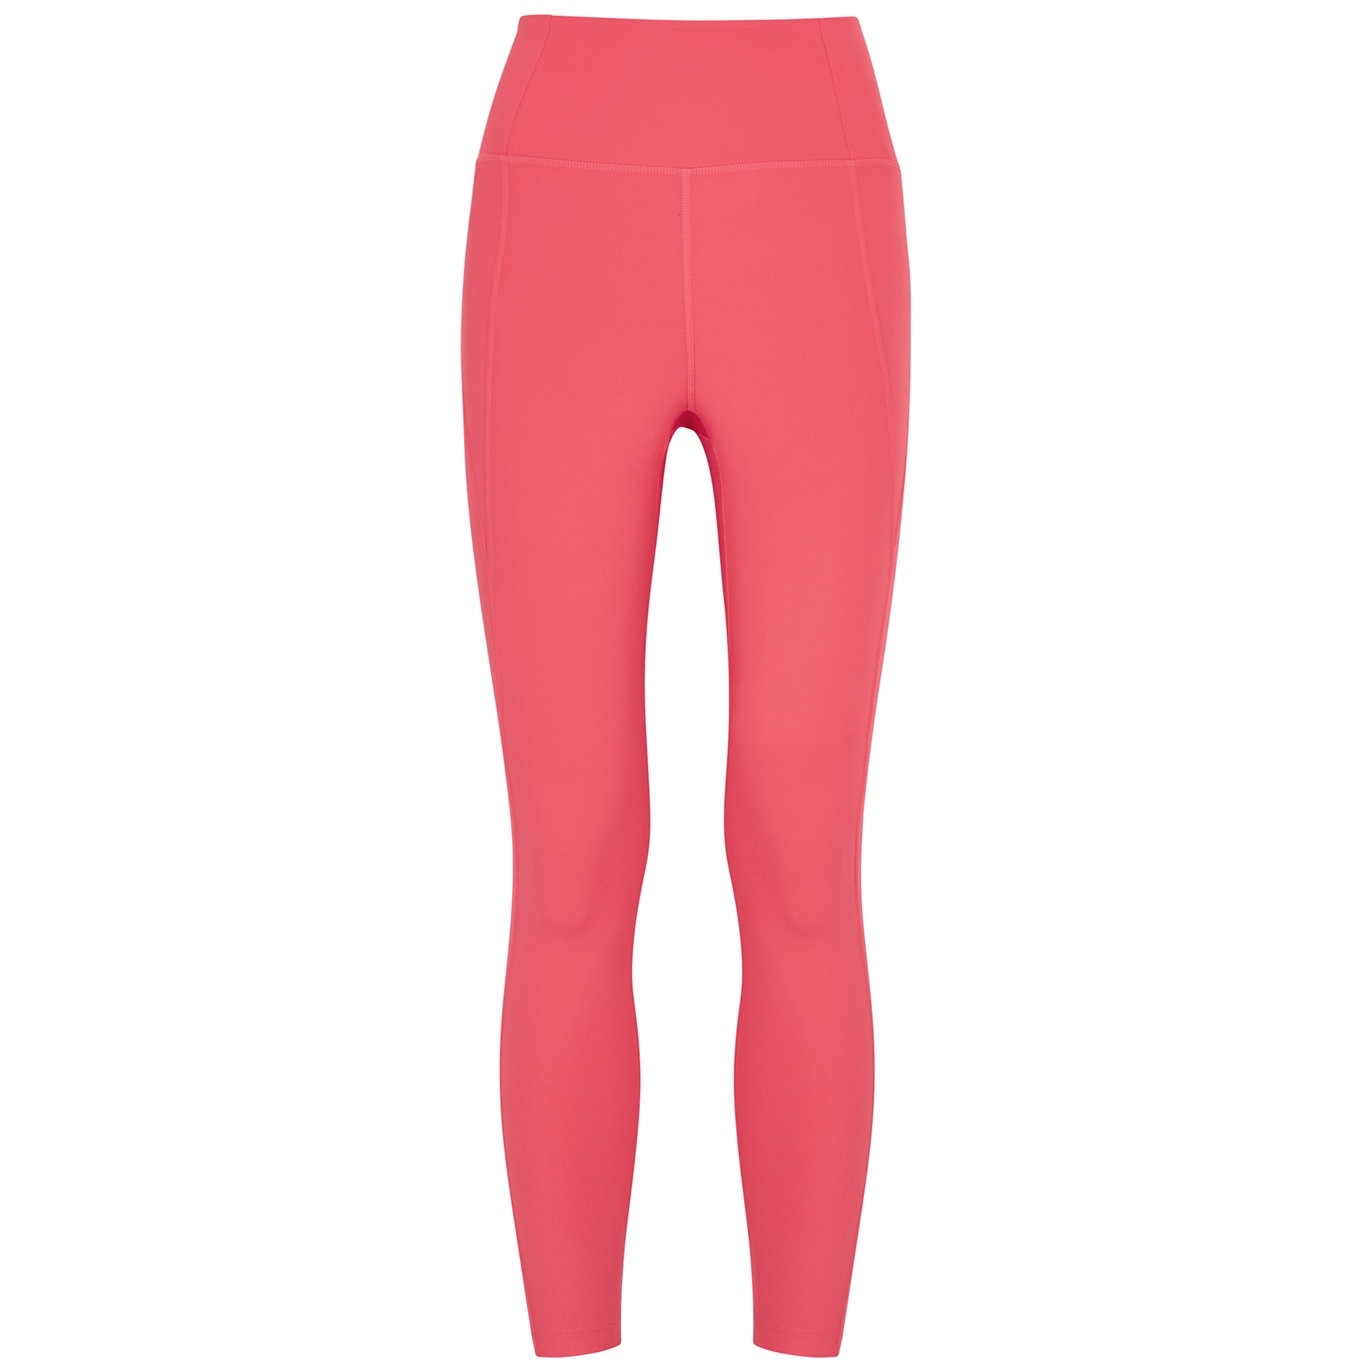 Girlfriend Collective Compressive Bright Pink High-rise Cropped Leggings - S